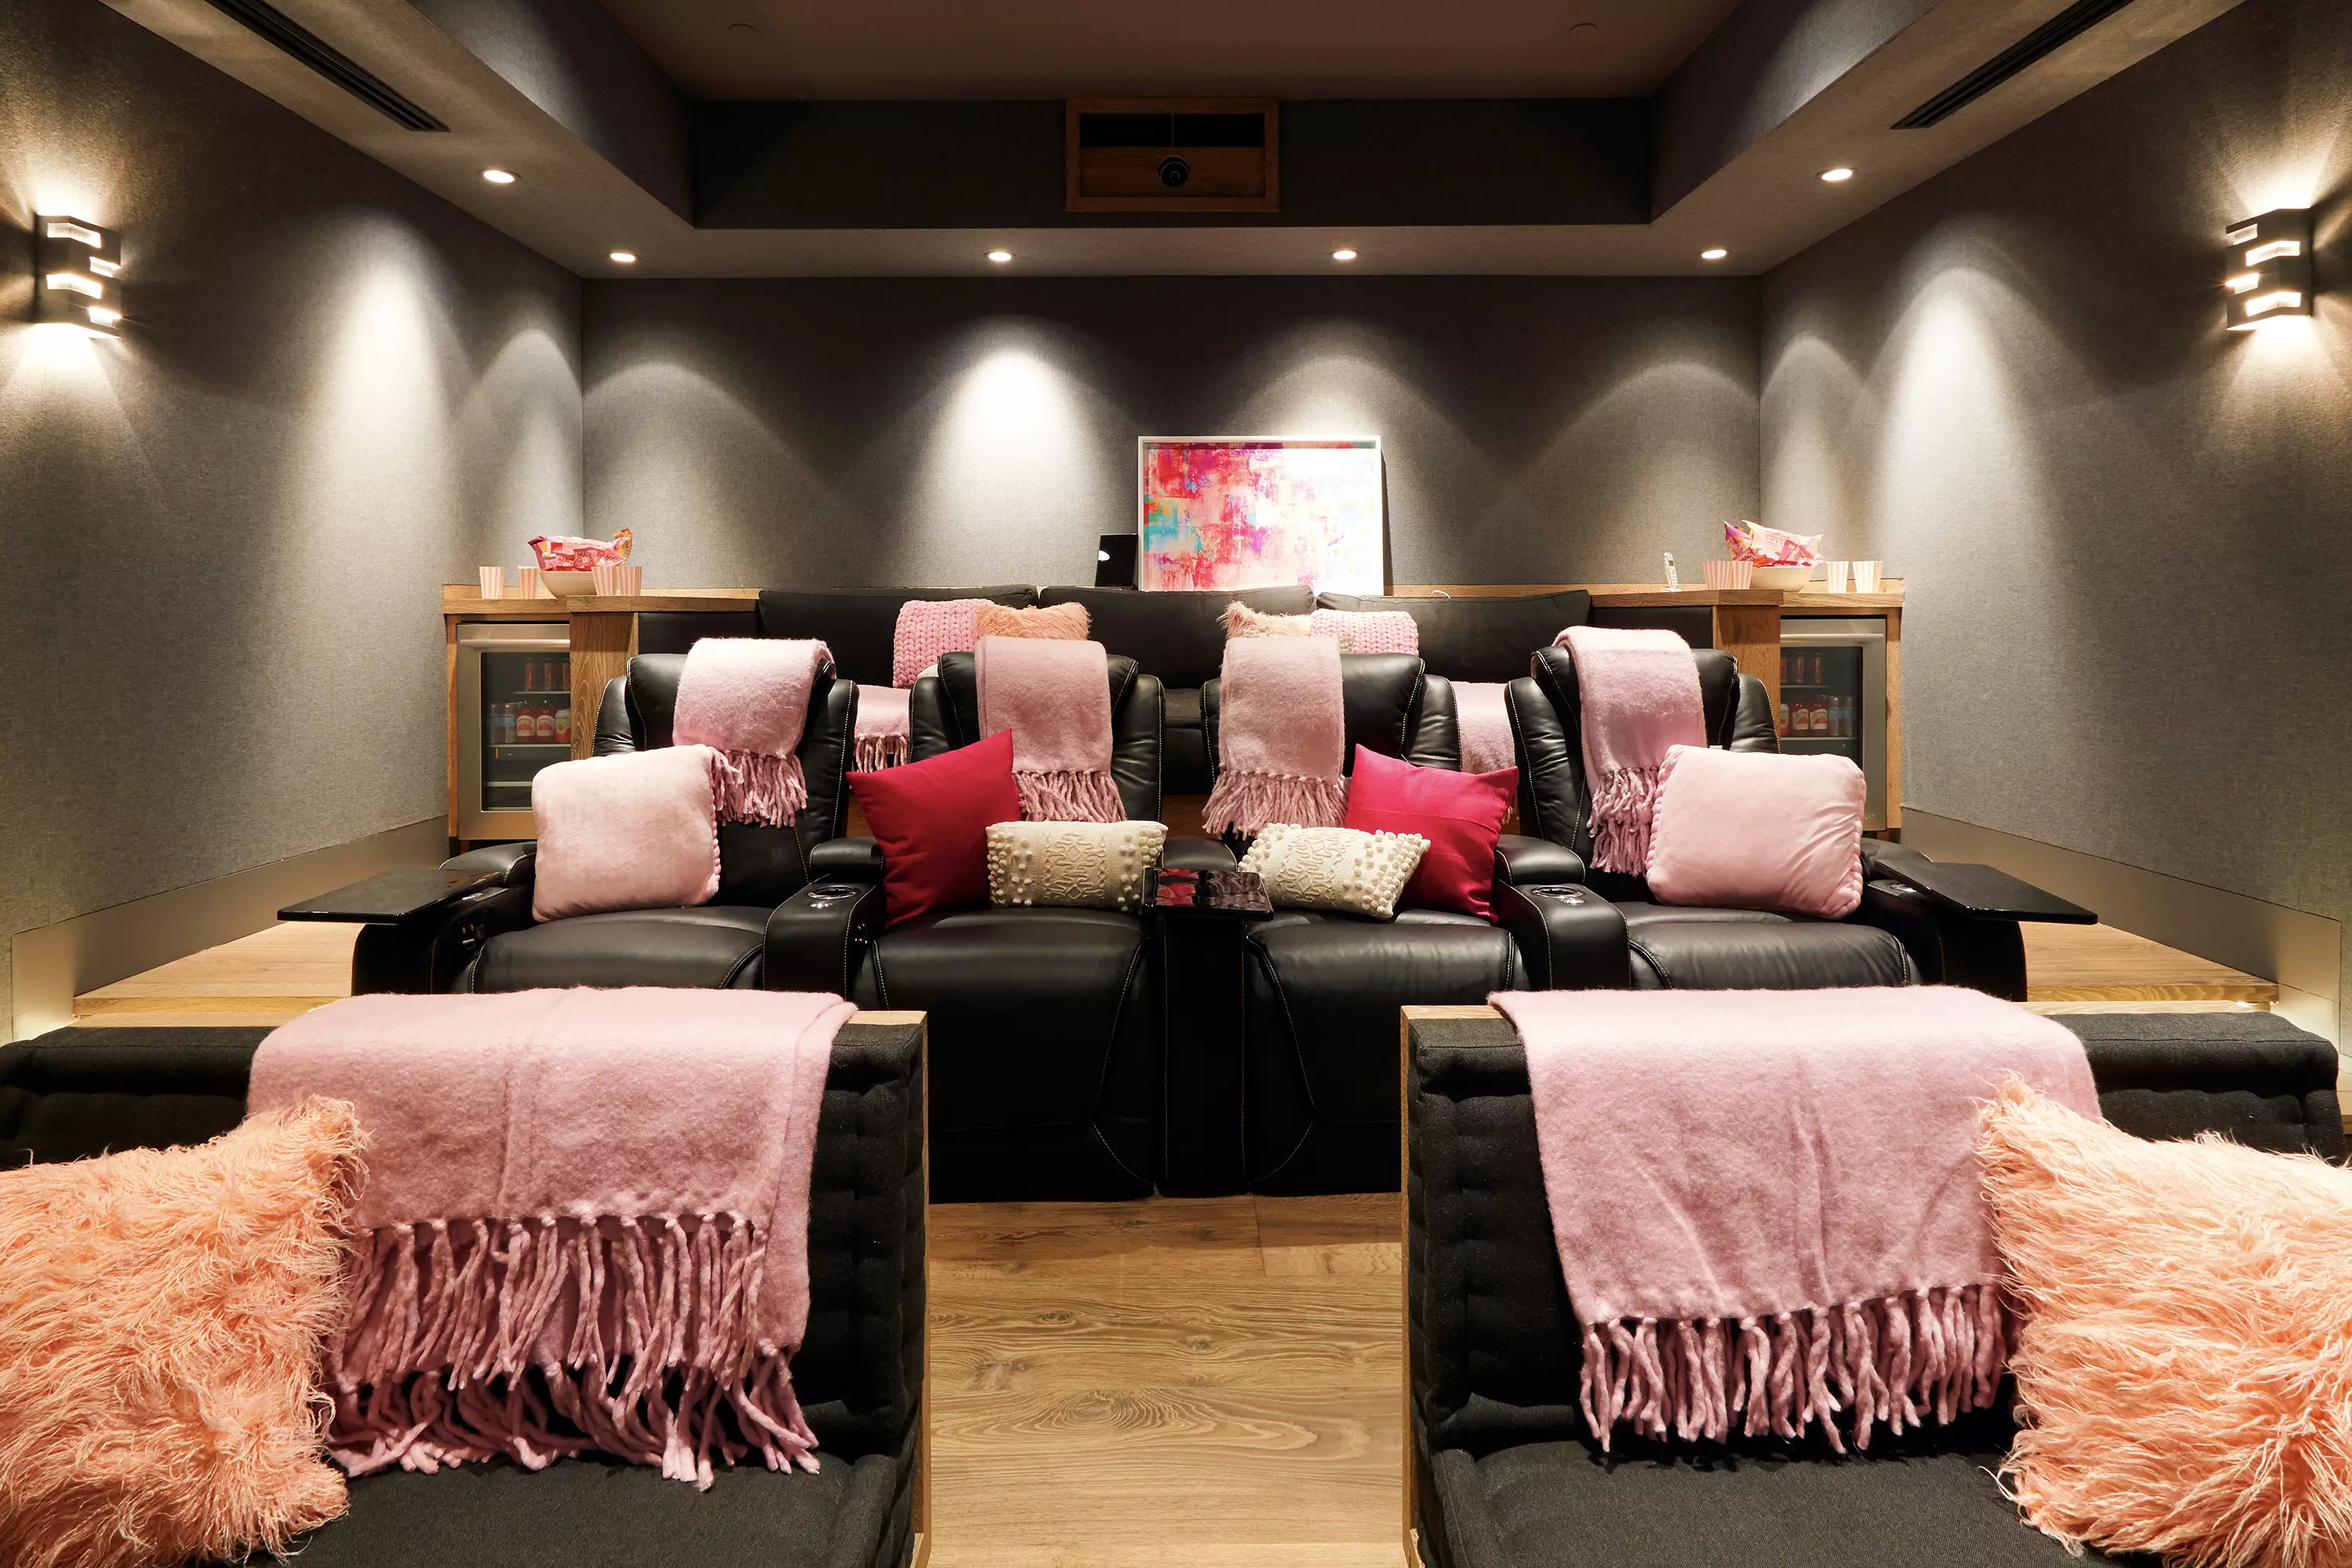 There's also a private cinema for you and your friends to snuggle up with a movie. (